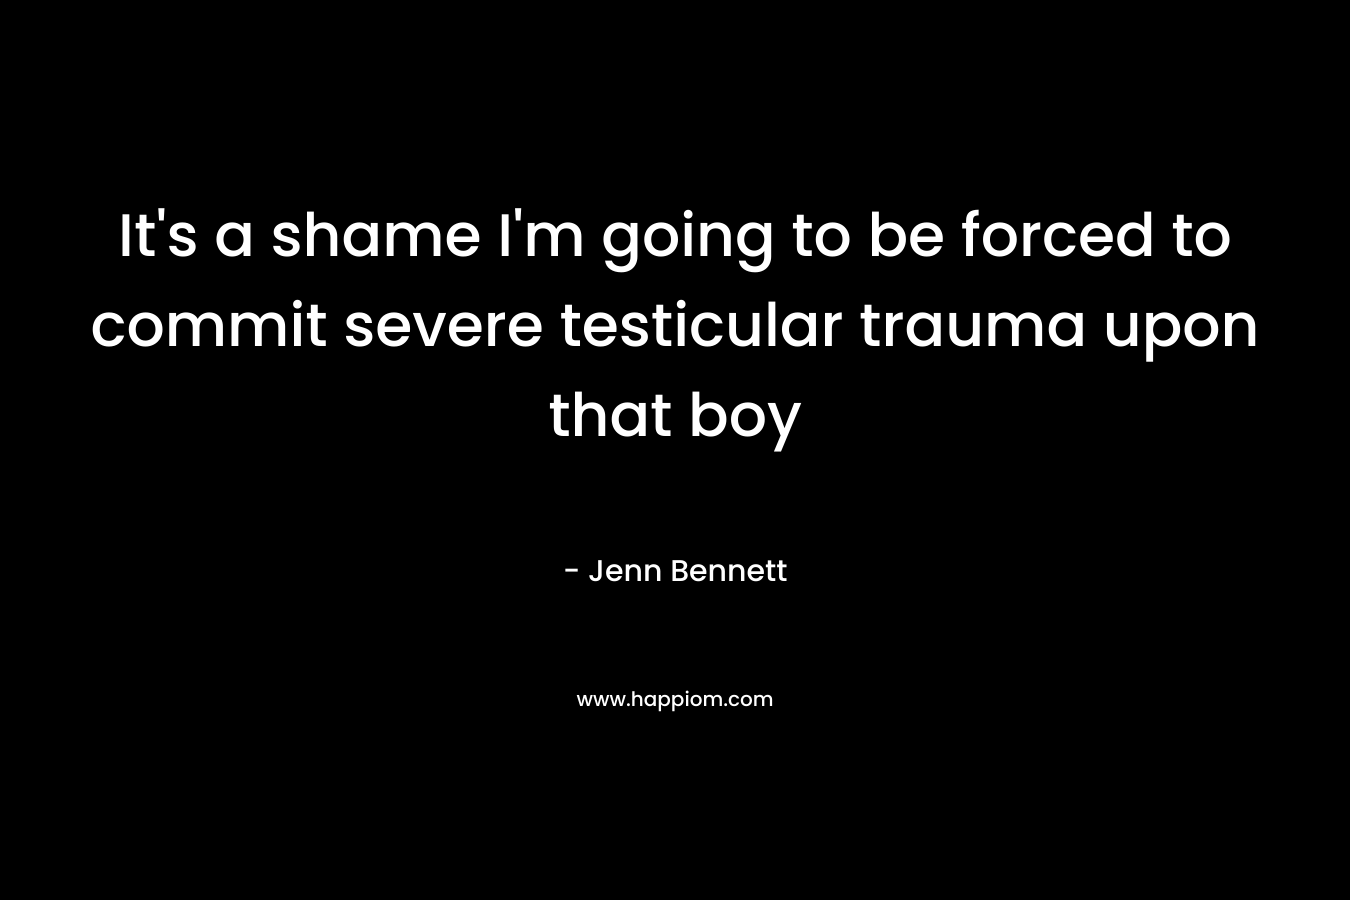 It's a shame I'm going to be forced to commit severe testicular trauma upon that boy